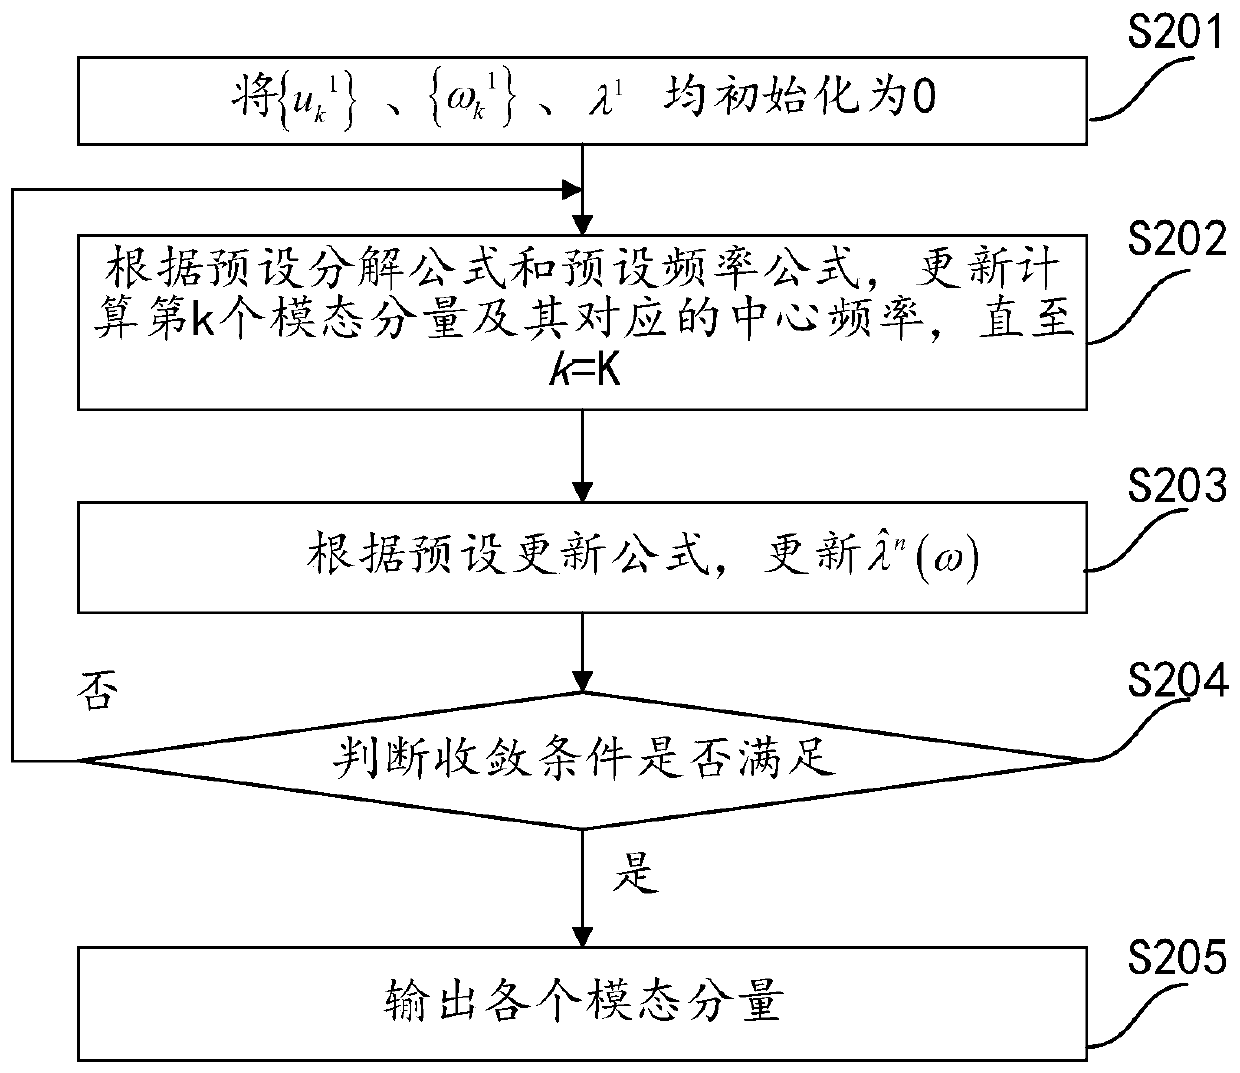 Ultrasonic partial discharge signal feature extraction method and related equipment